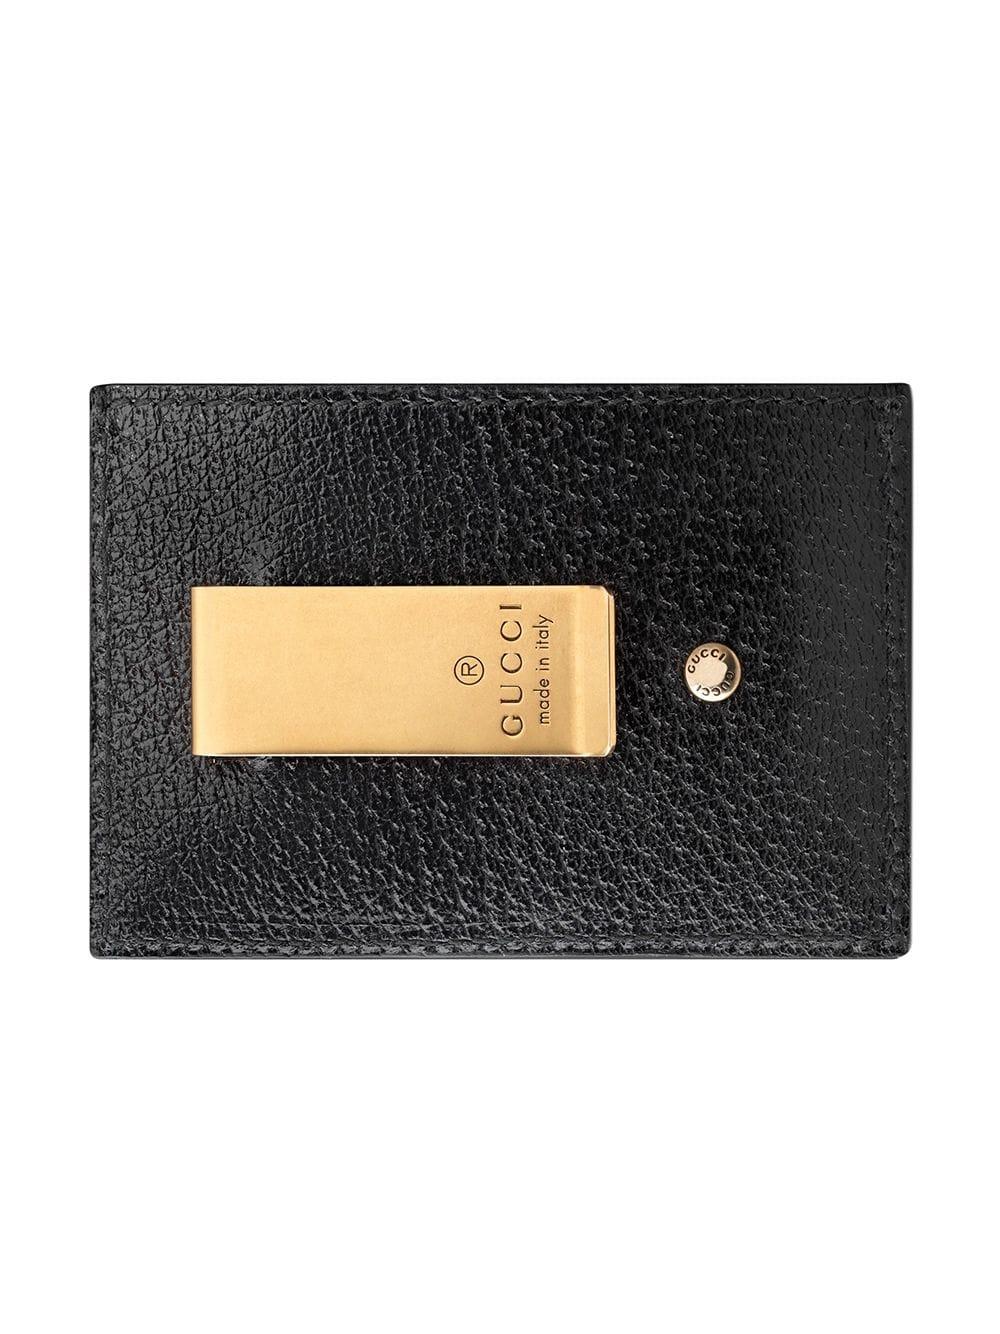 gucci money clip and card holder